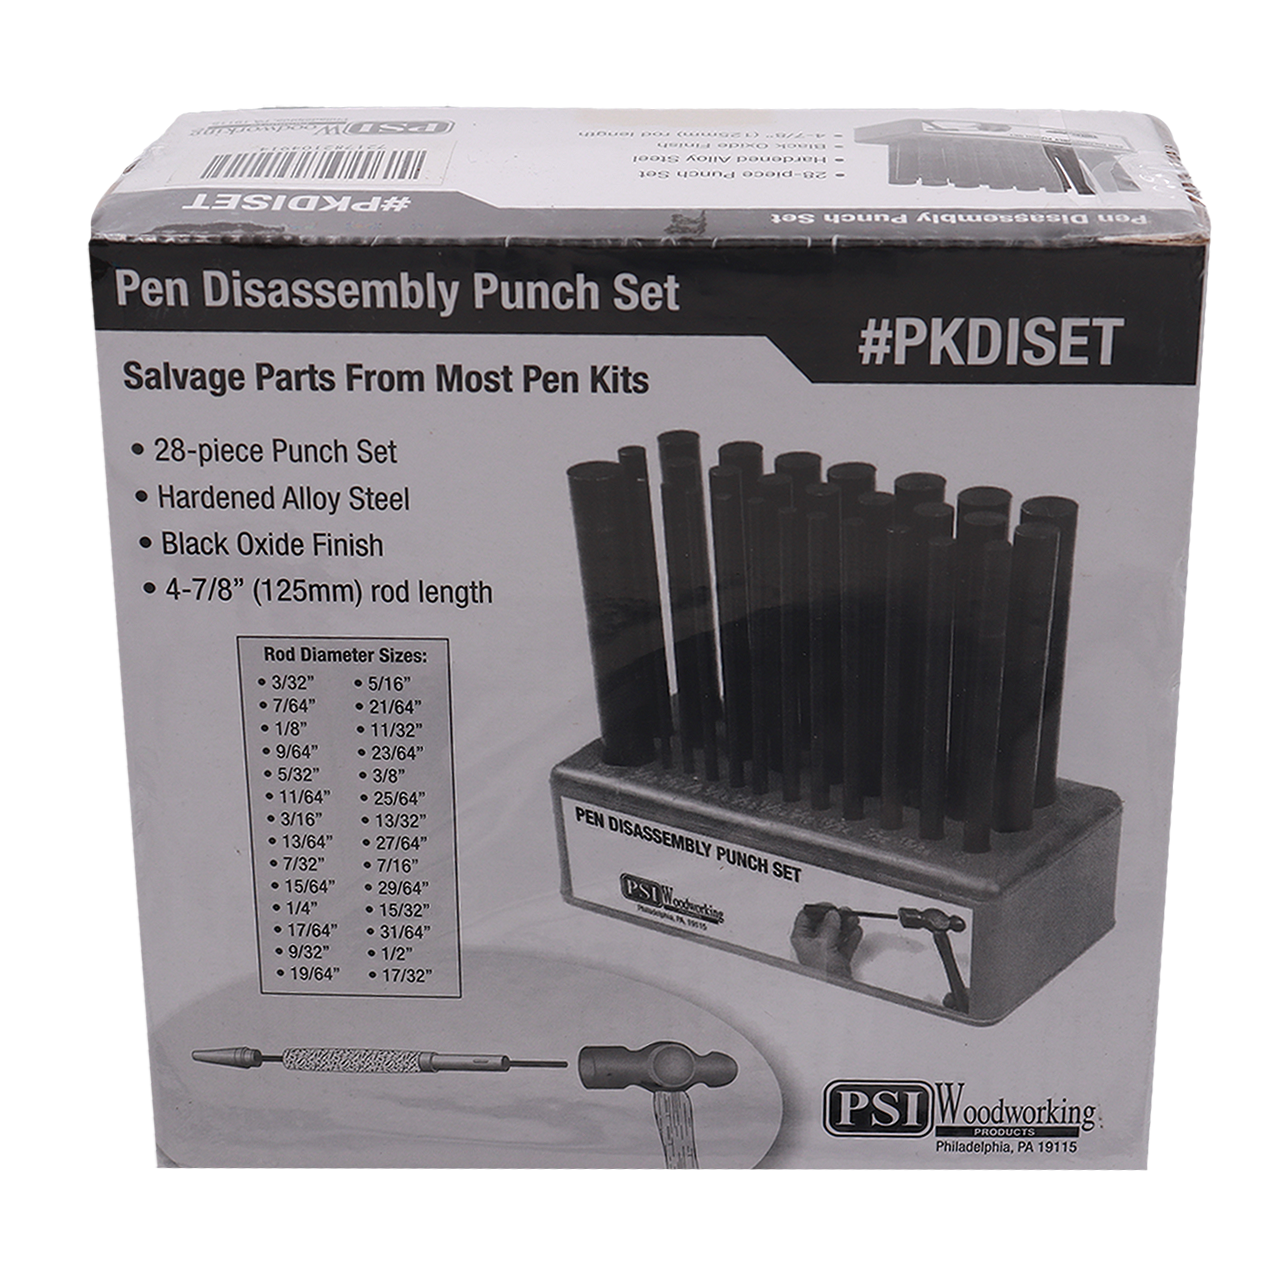 Pen Disassembly Punch Set